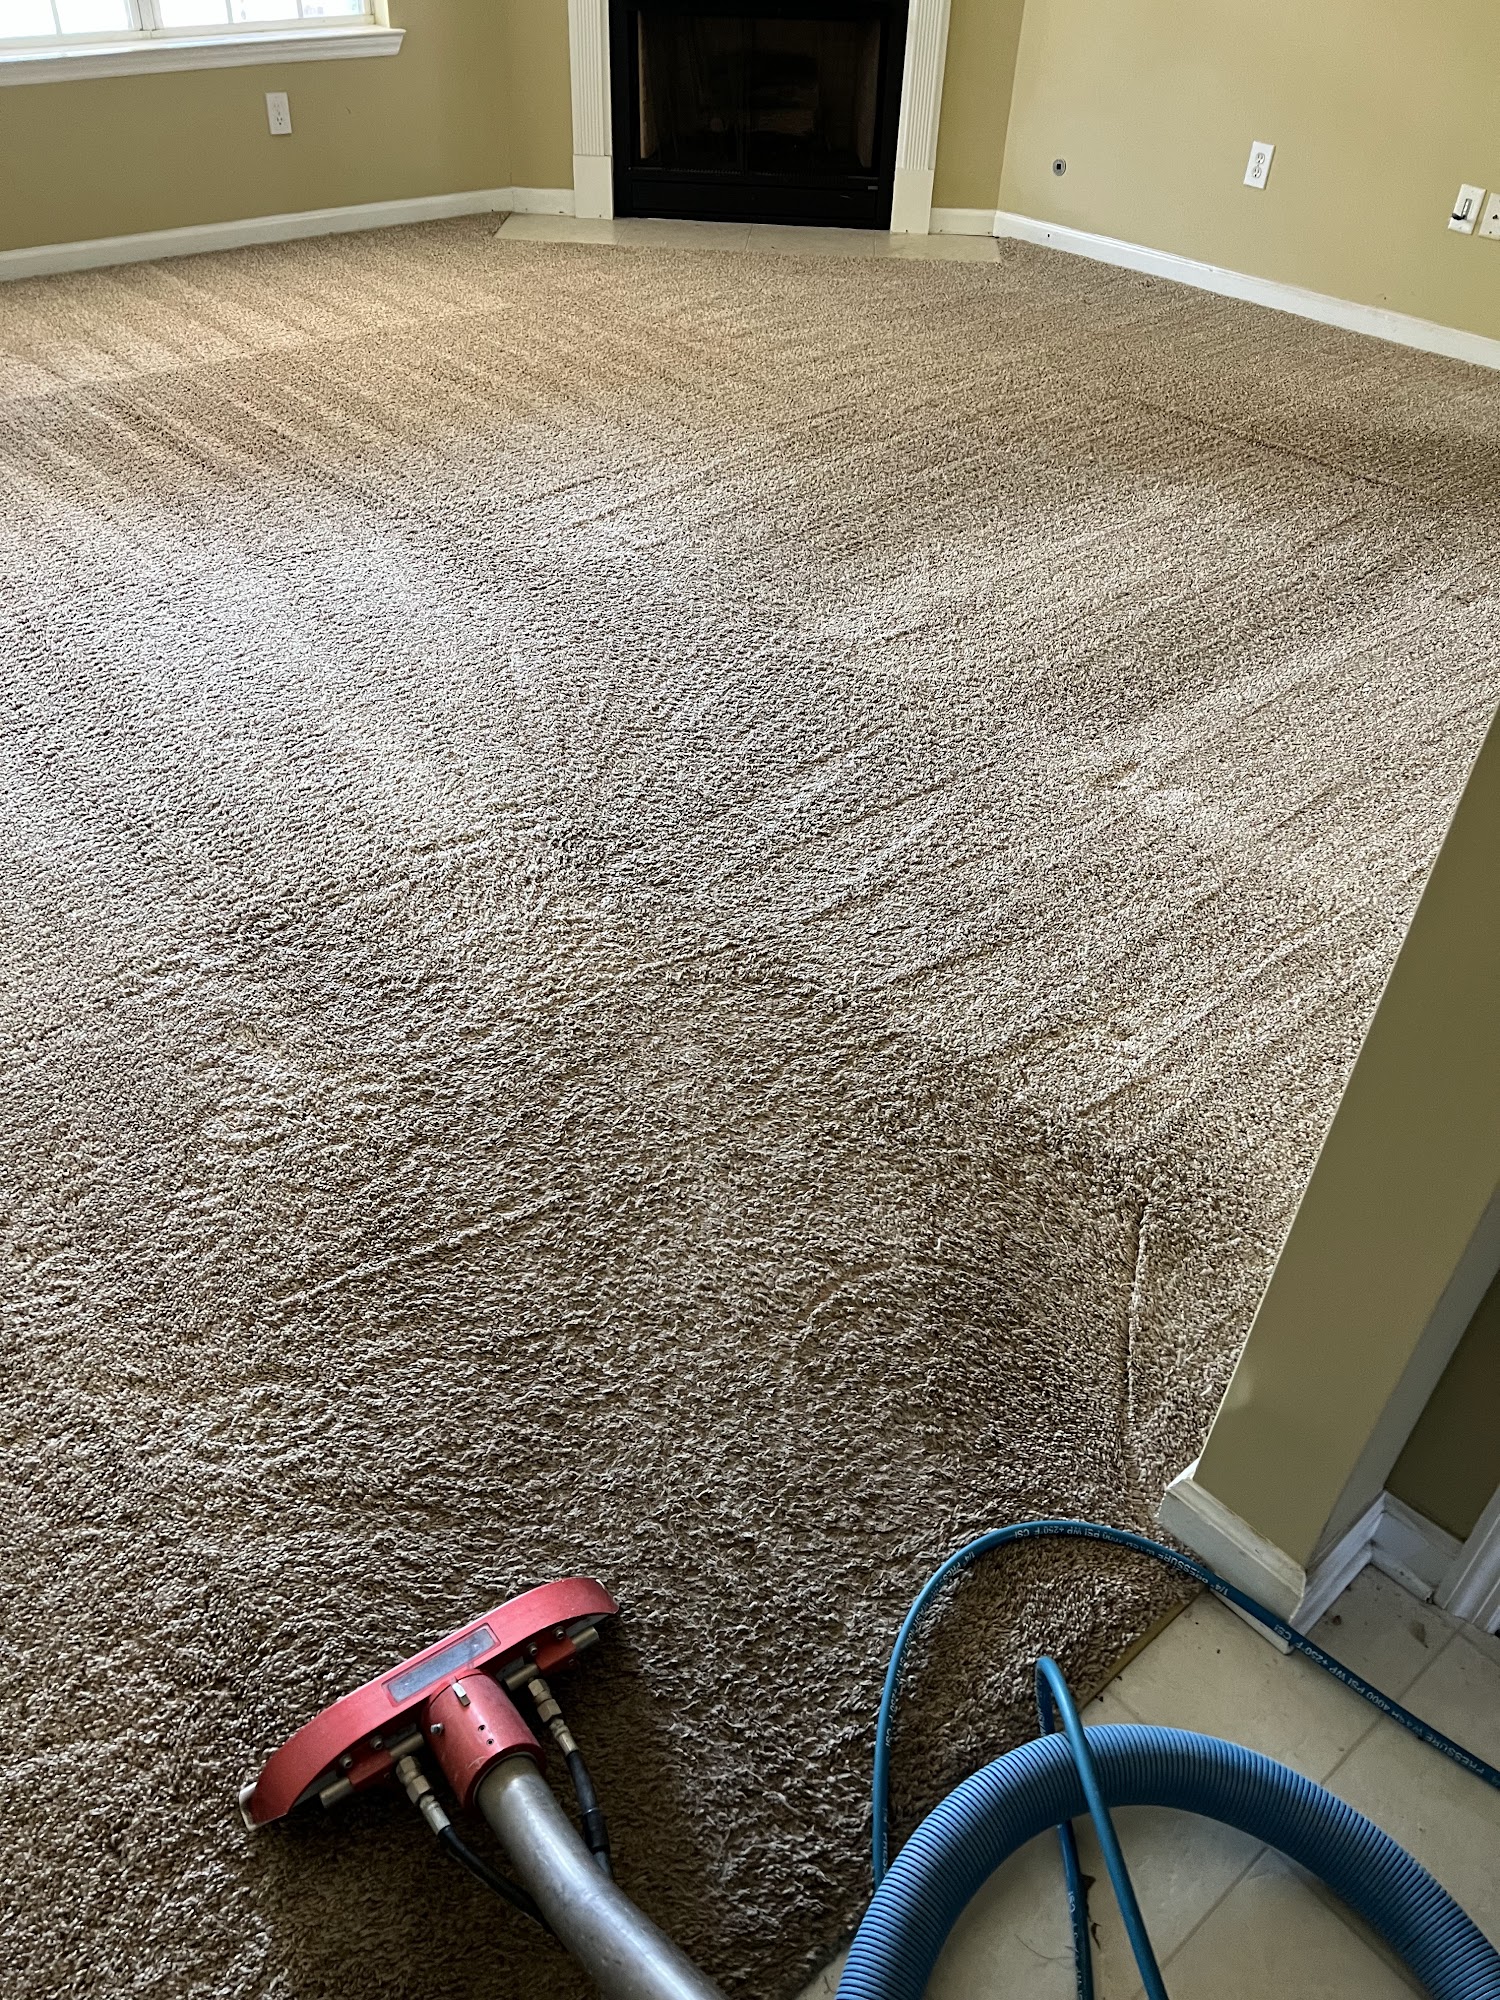 Quay's Carpet Cleaning Services